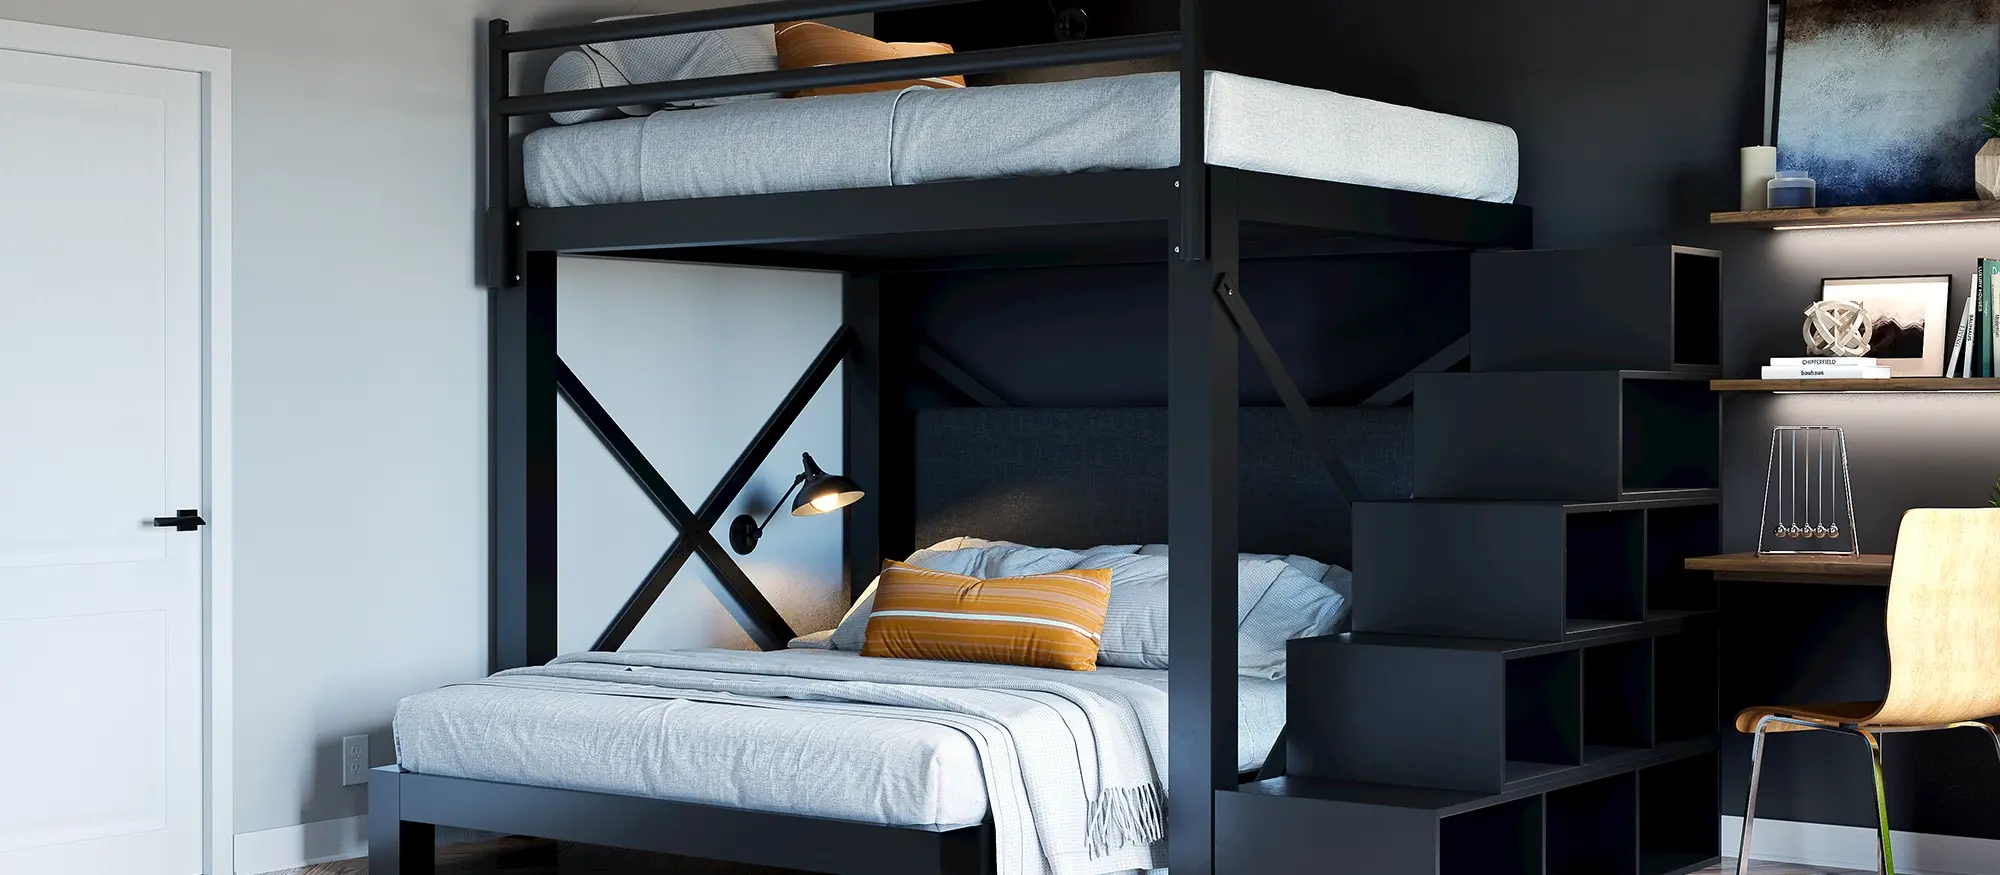 A black Full Over Queen size L-Shaped Bunk Bed for adults with matching wooden stairs in an upscale guest bedroom space. Seen from the lower left-hand corner of the bottom bunk.